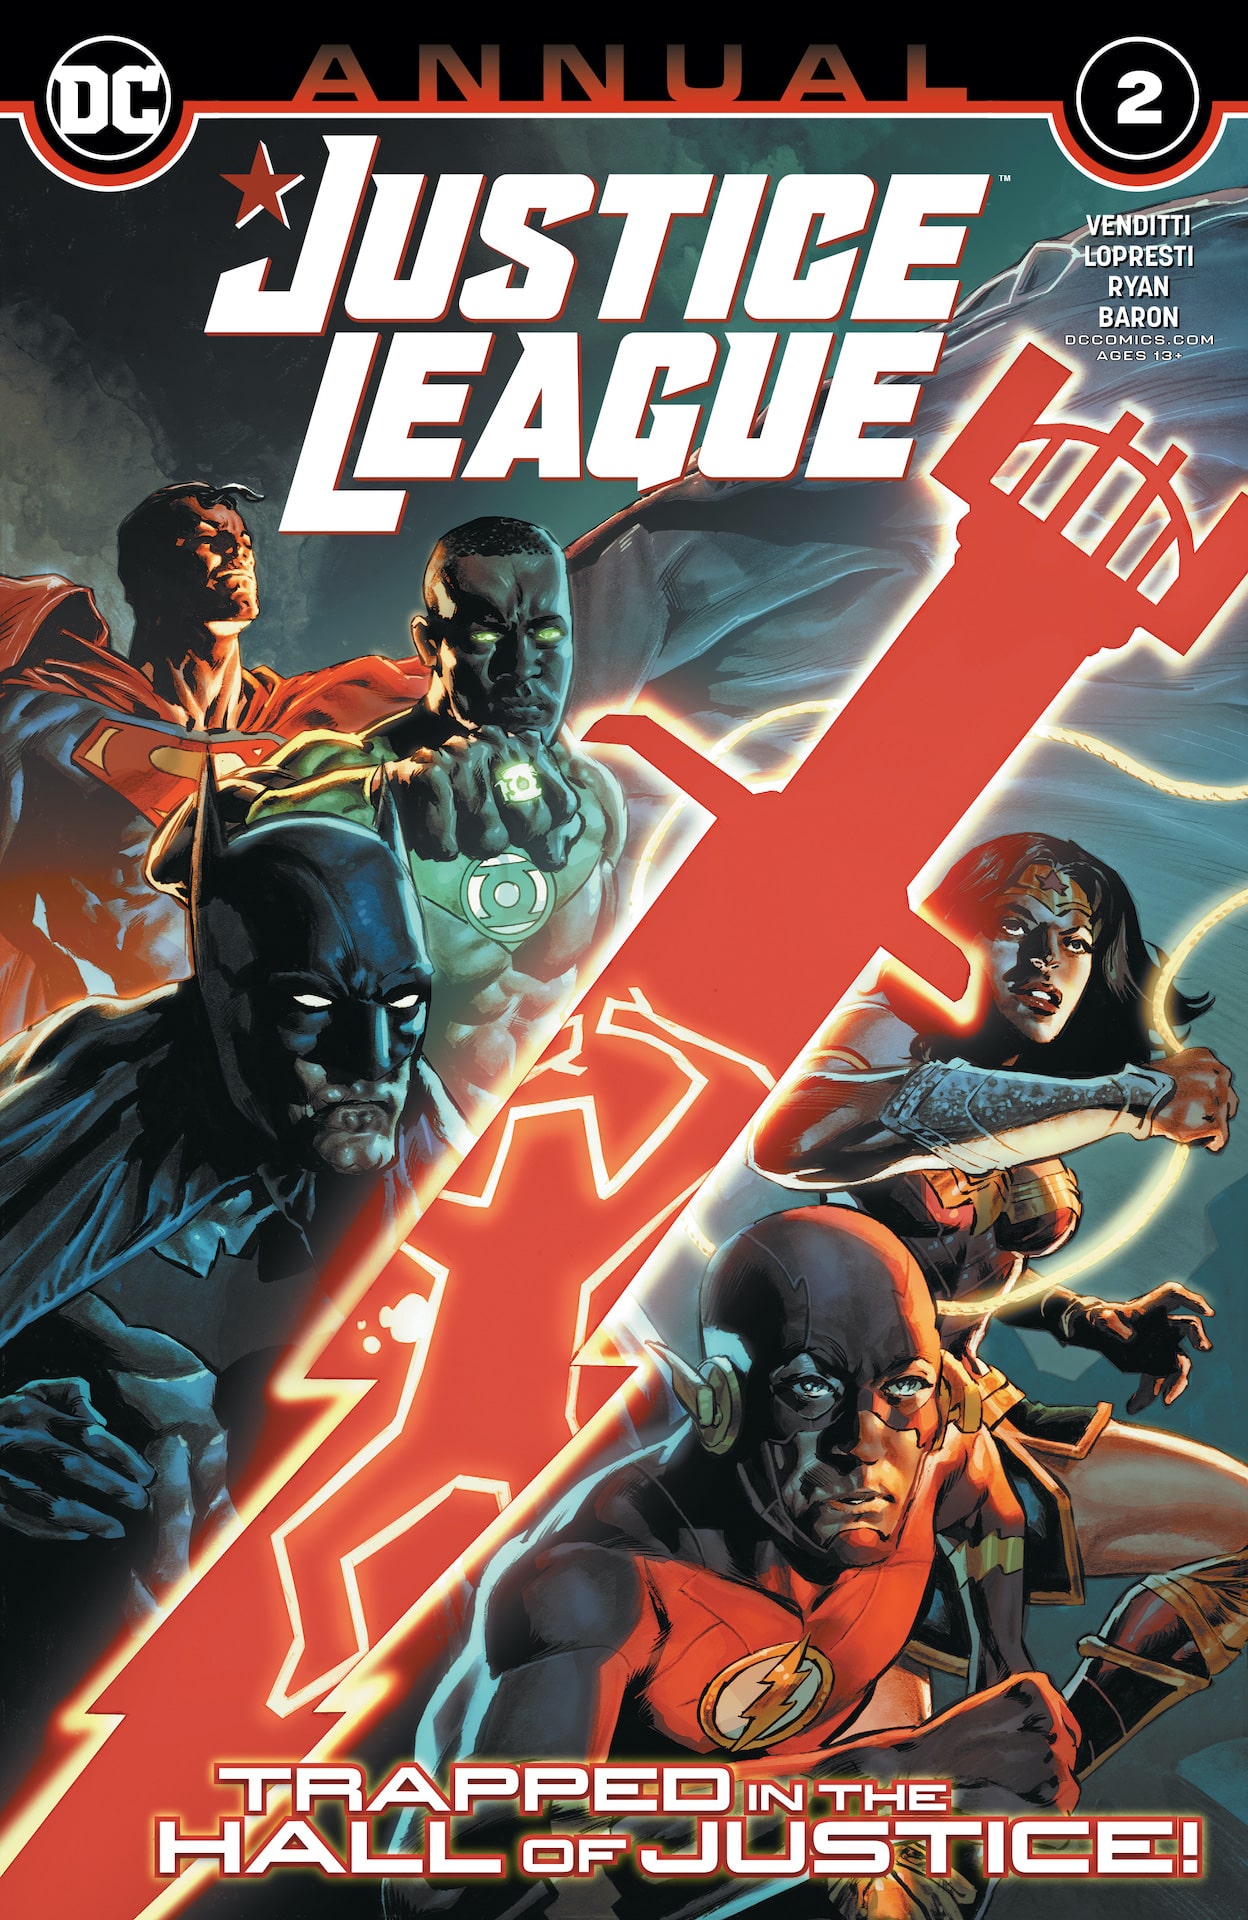 DC Preview: Justice League Annual #2